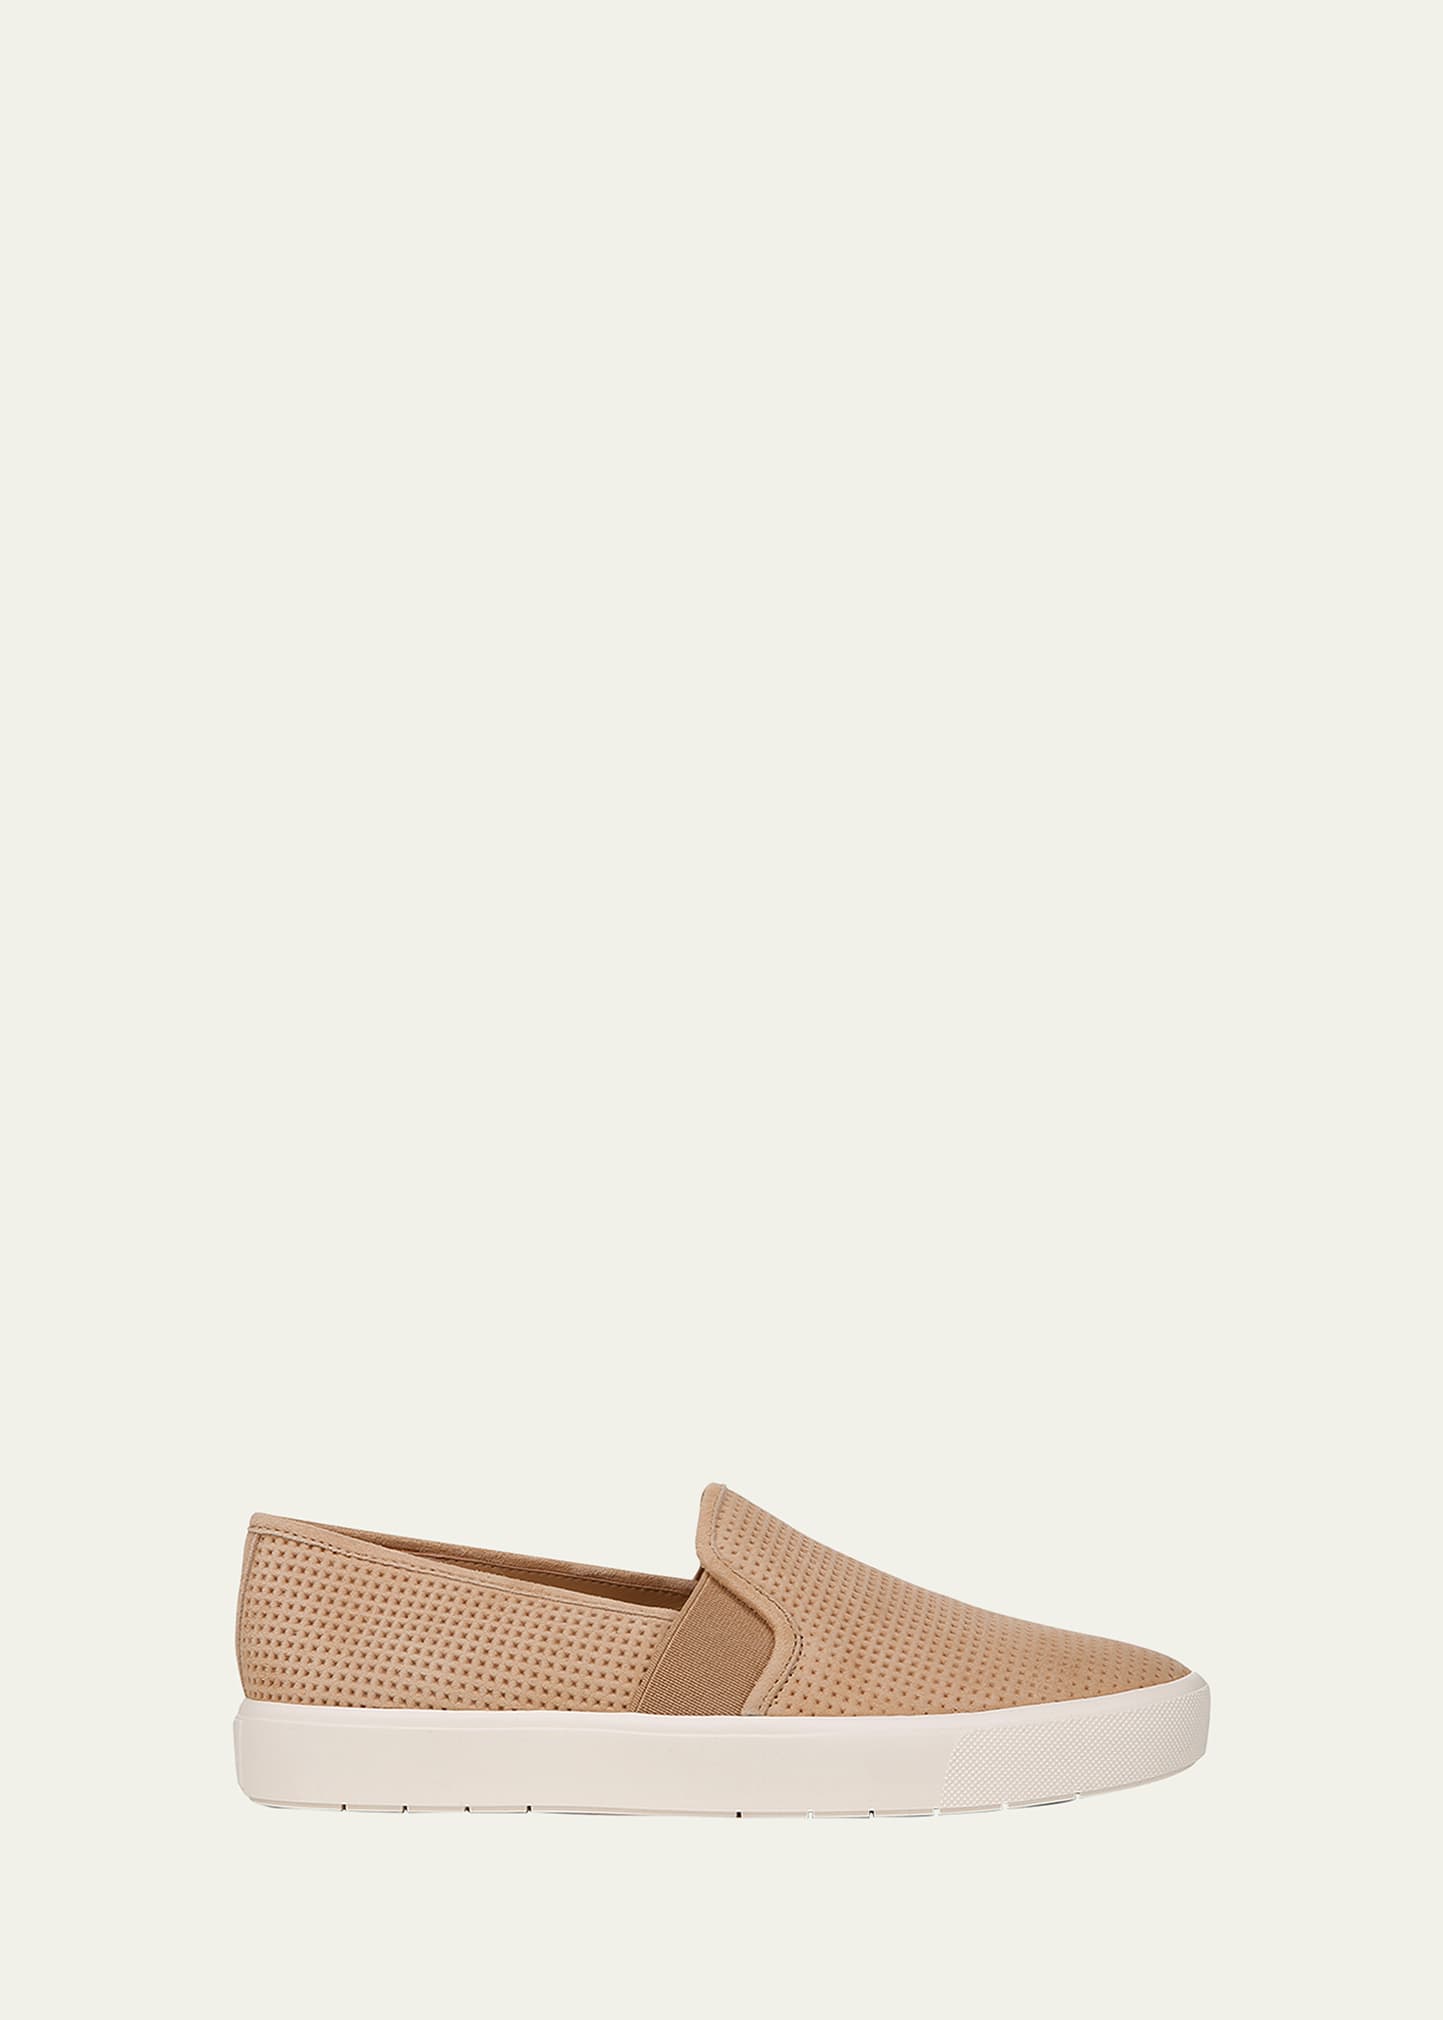 Vince Blair Perforated Suede Slip-on Sneakers In Catalina Blush Su